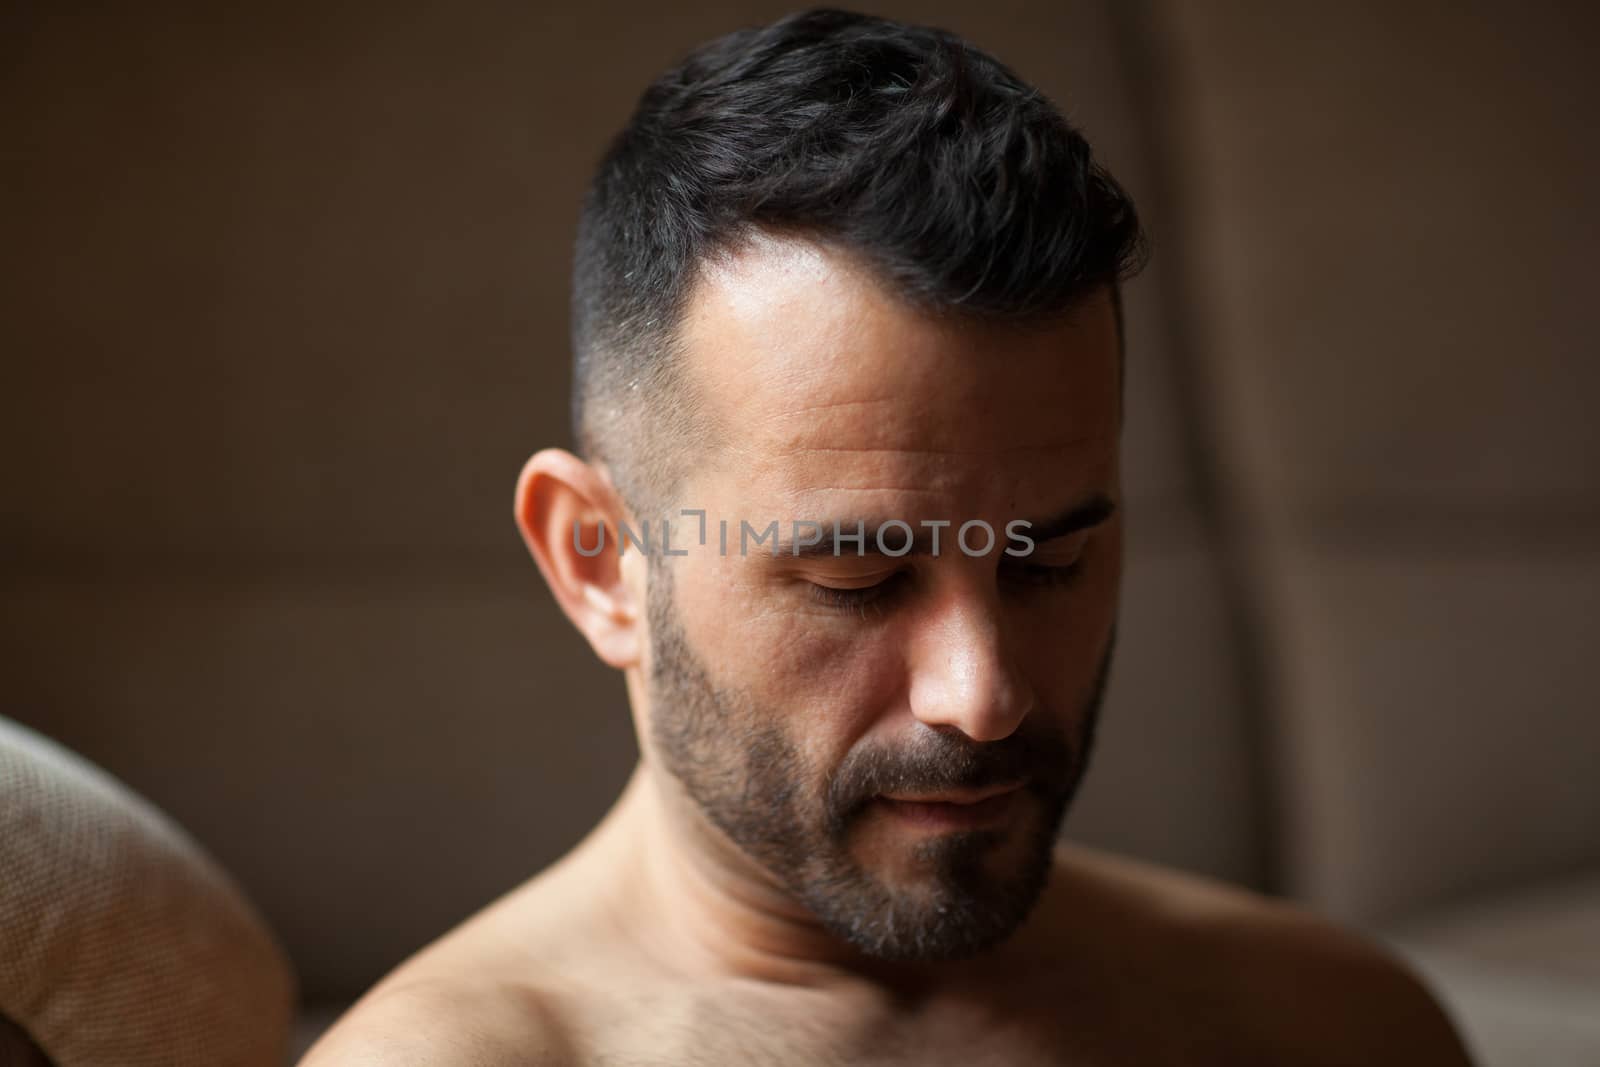 Dark-haired man looking down in soft light